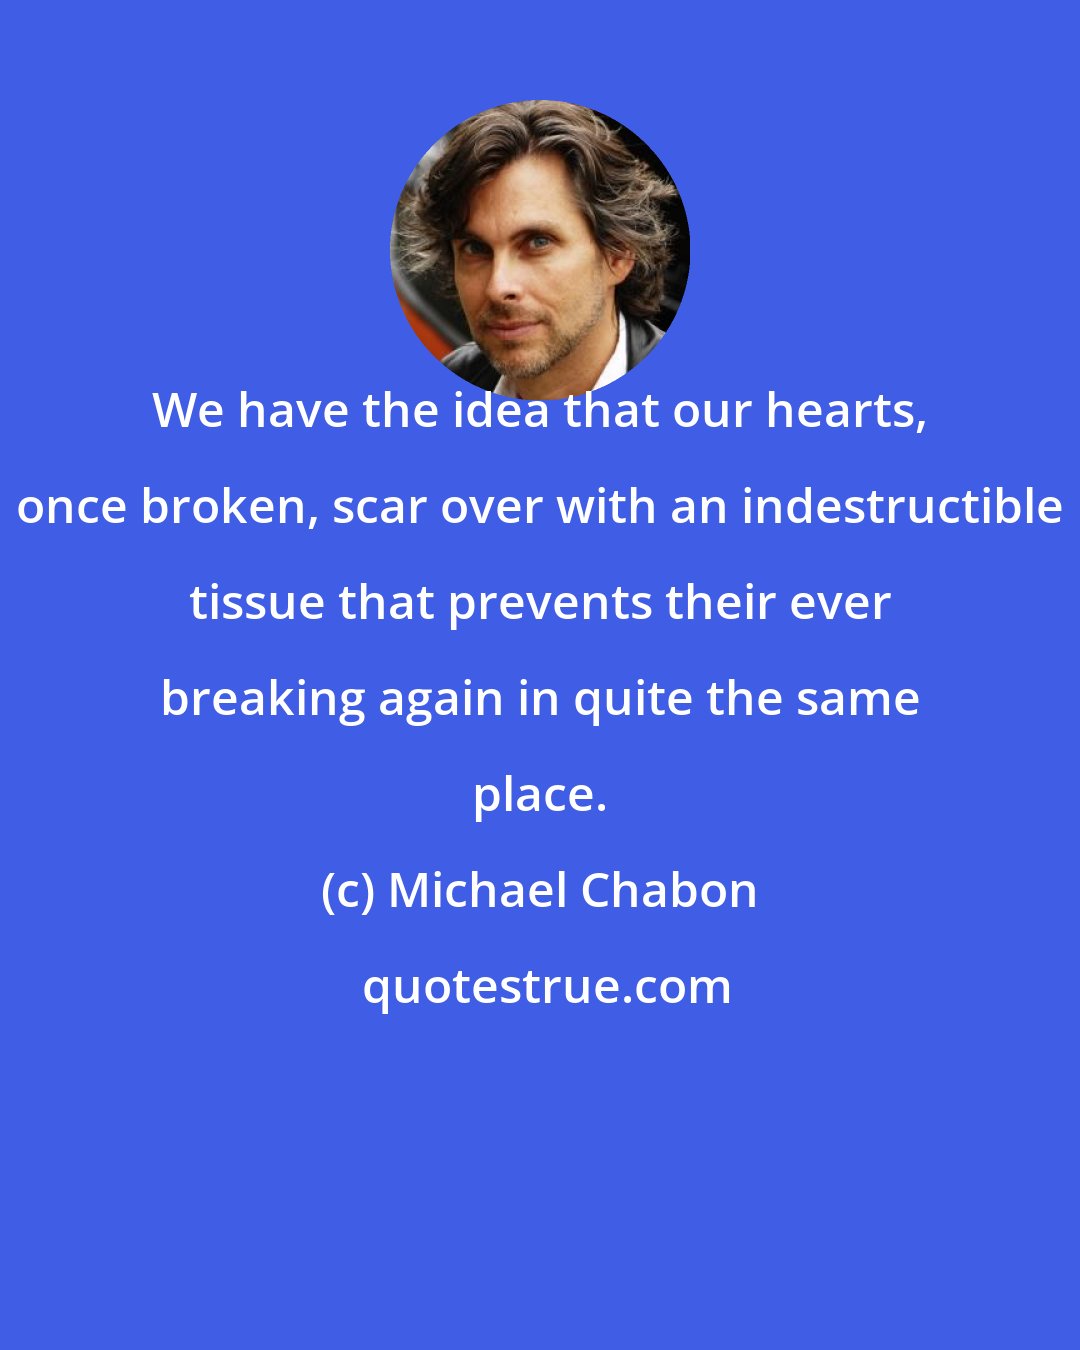 Michael Chabon: We have the idea that our hearts, once broken, scar over with an indestructible tissue that prevents their ever breaking again in quite the same place.